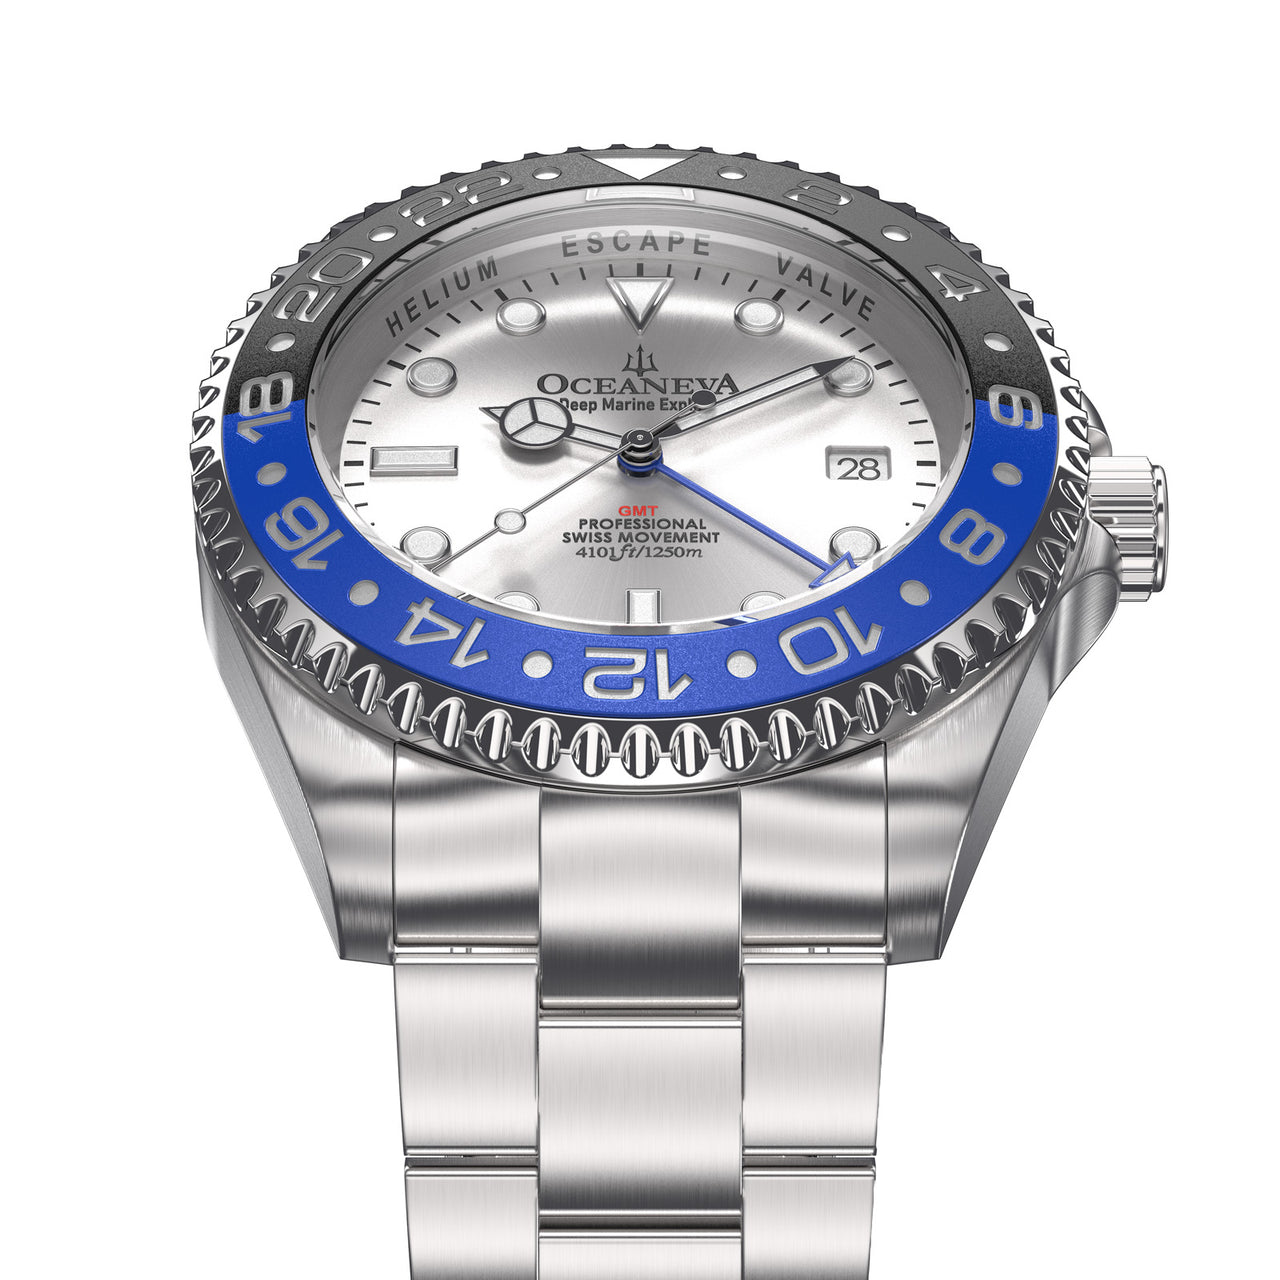 Oceaneva 1250M GMT Dive Watch Silver Blue And Black Frontal View Picture